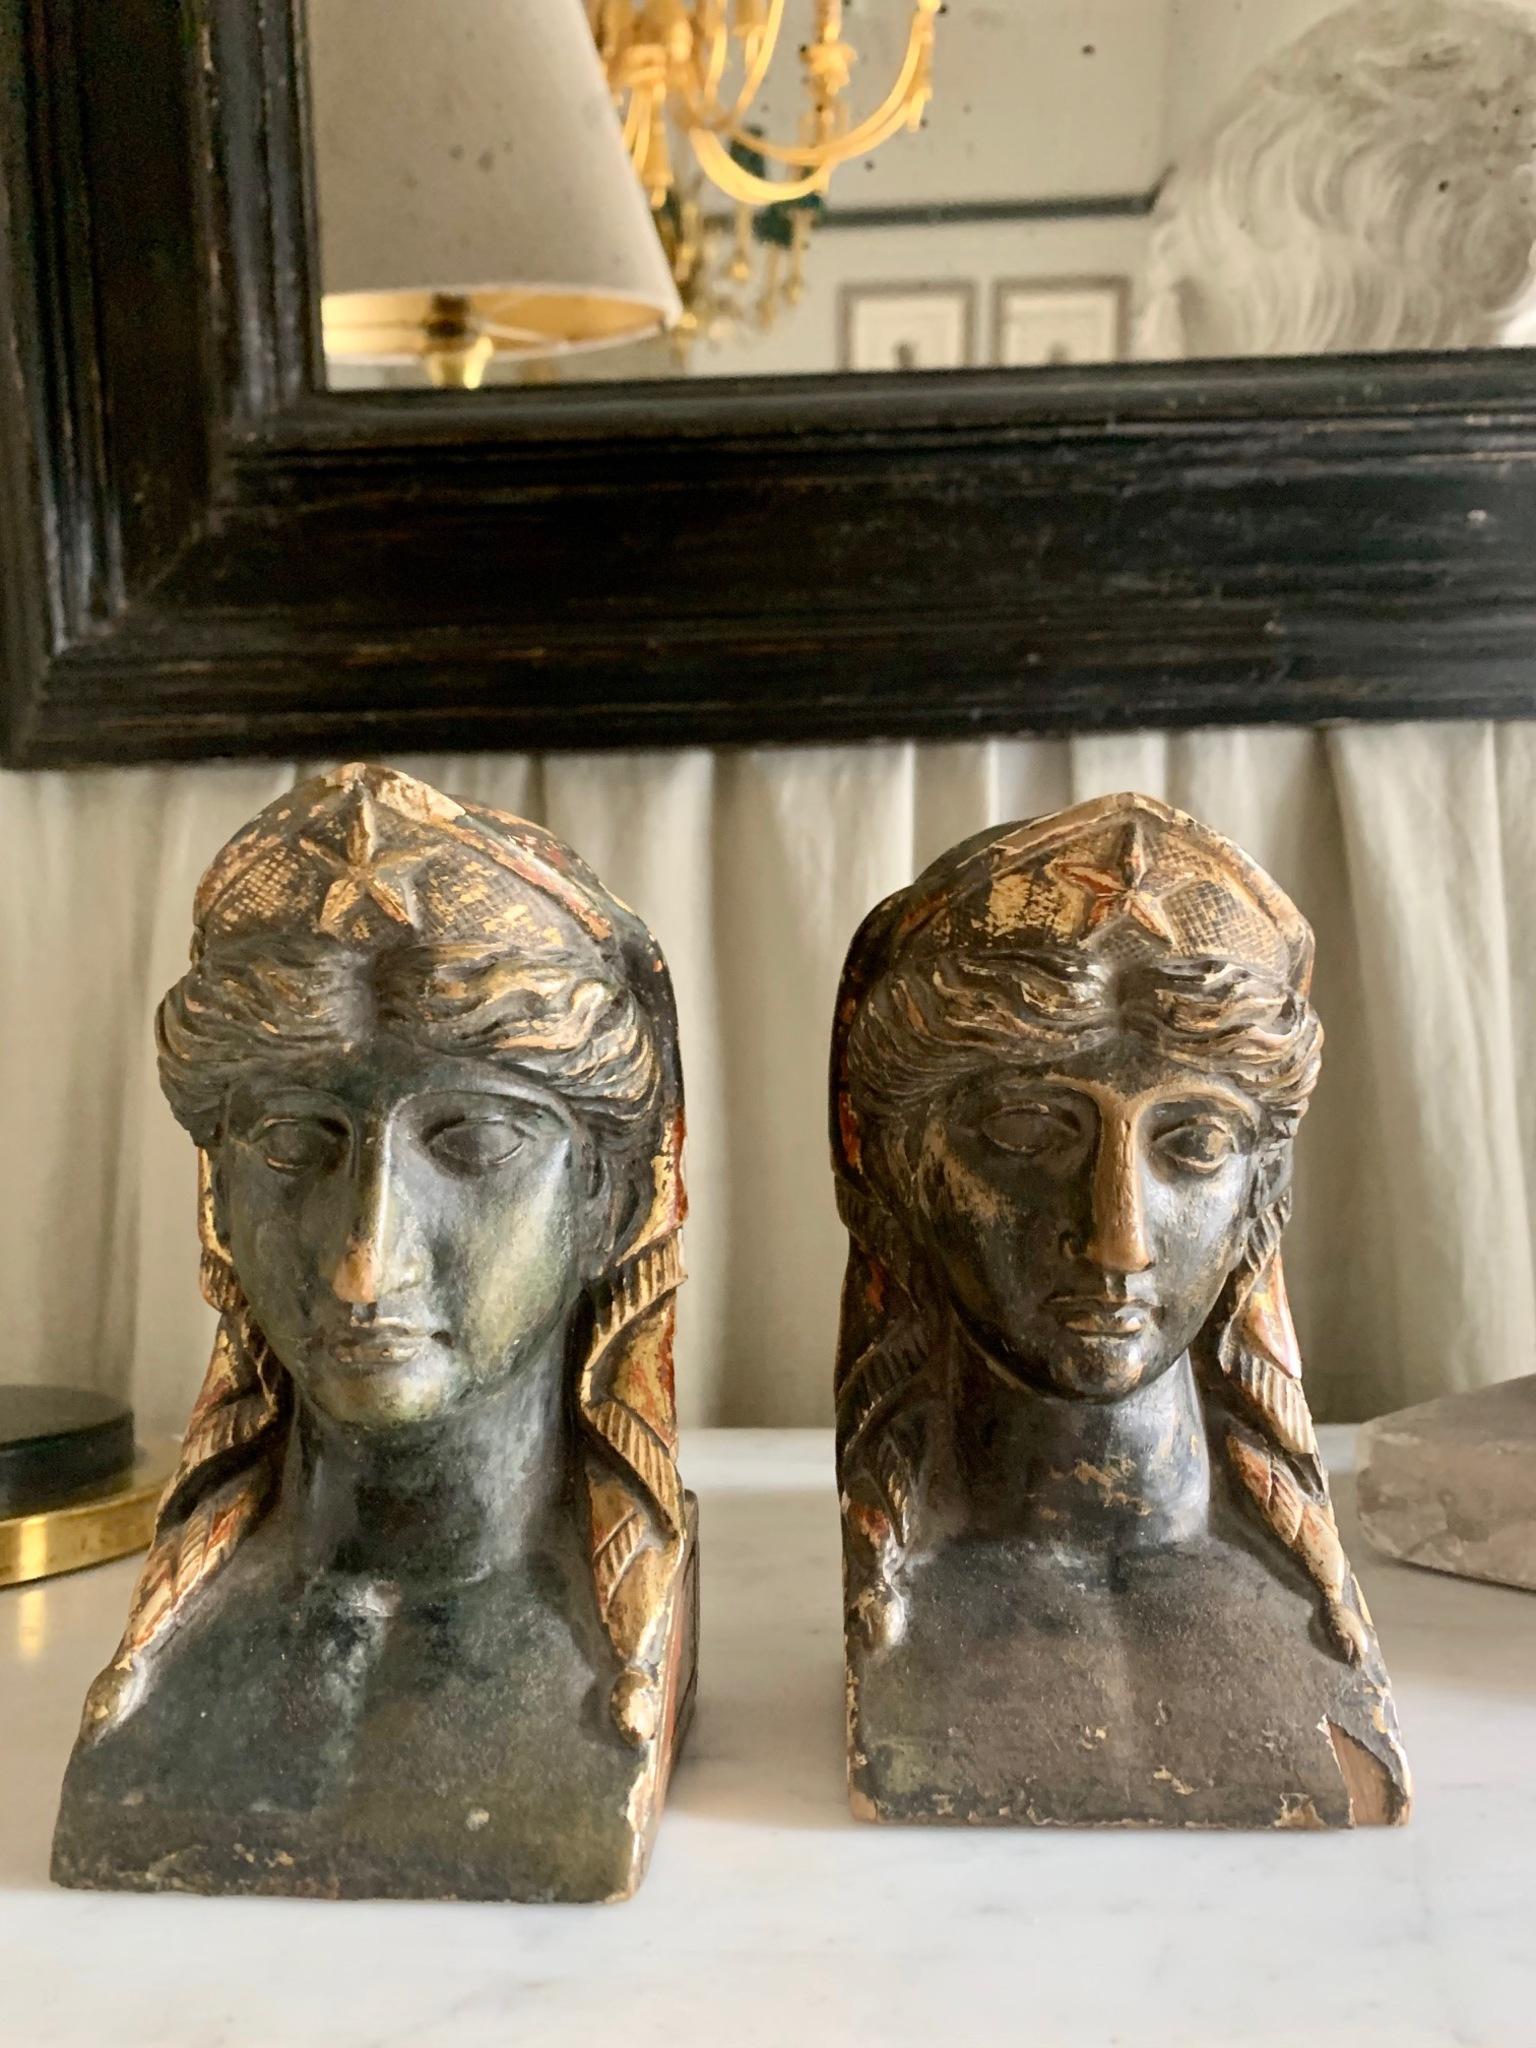 Pair of sphinx heads, French empire era in gilded and polychrome wood, surely they were part of an empire furniture.